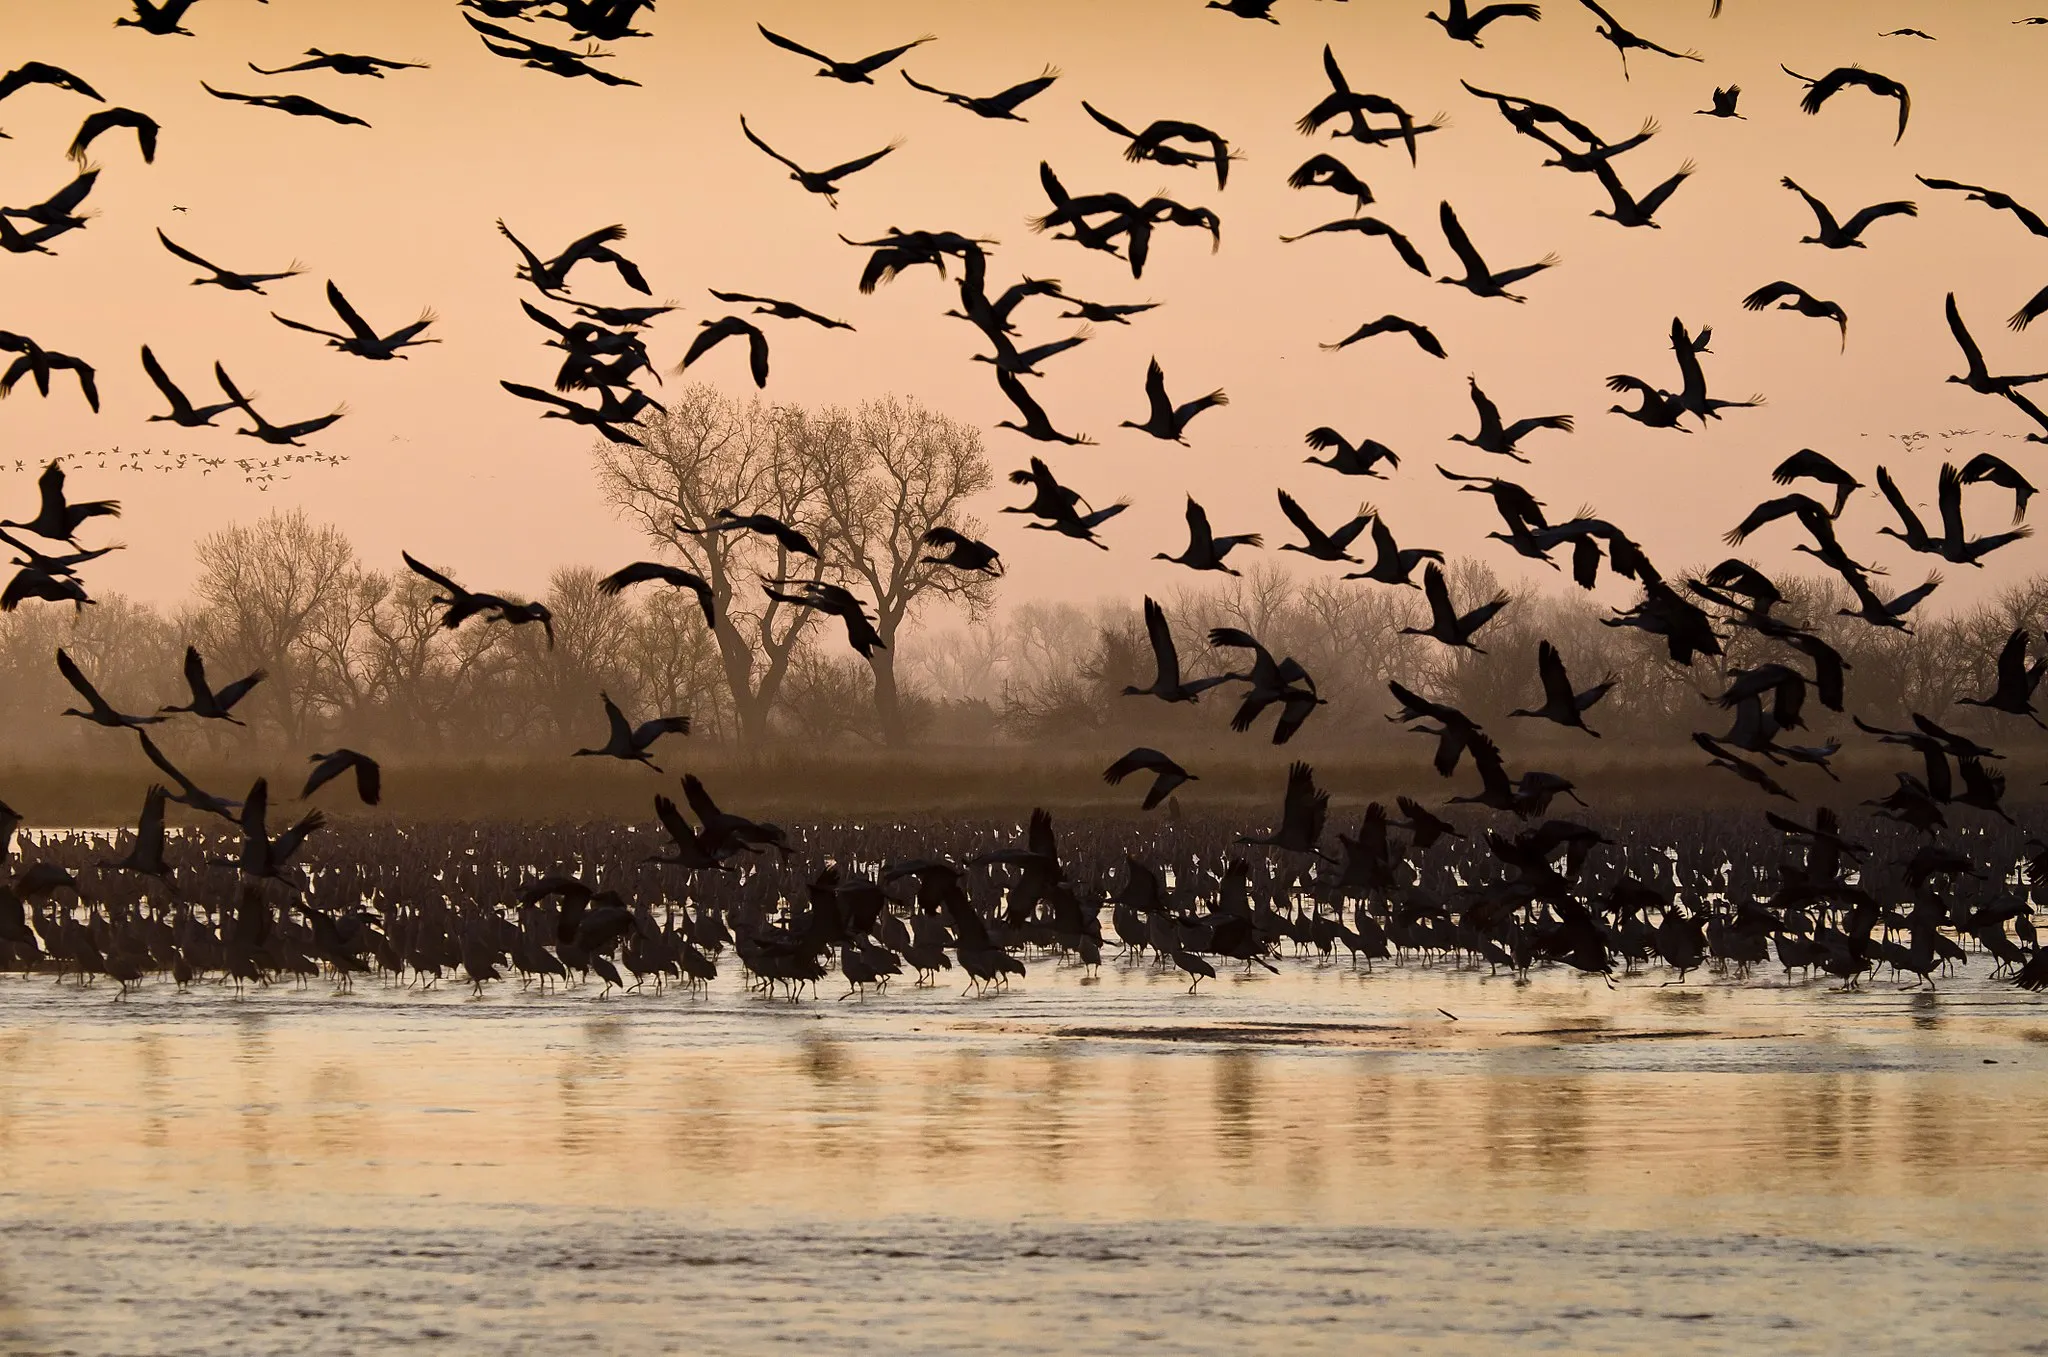 Photo showing: Every year hundreds of thousands of sandhill cranes congregate on the Platte River during their Spring migration, forming large flocks that use the sandbars of the Platte River as a nightime refuge before dispersing to local fields to feed during the day.
Credit: Larry Crist / USFWS

Photo Contest Entry #152